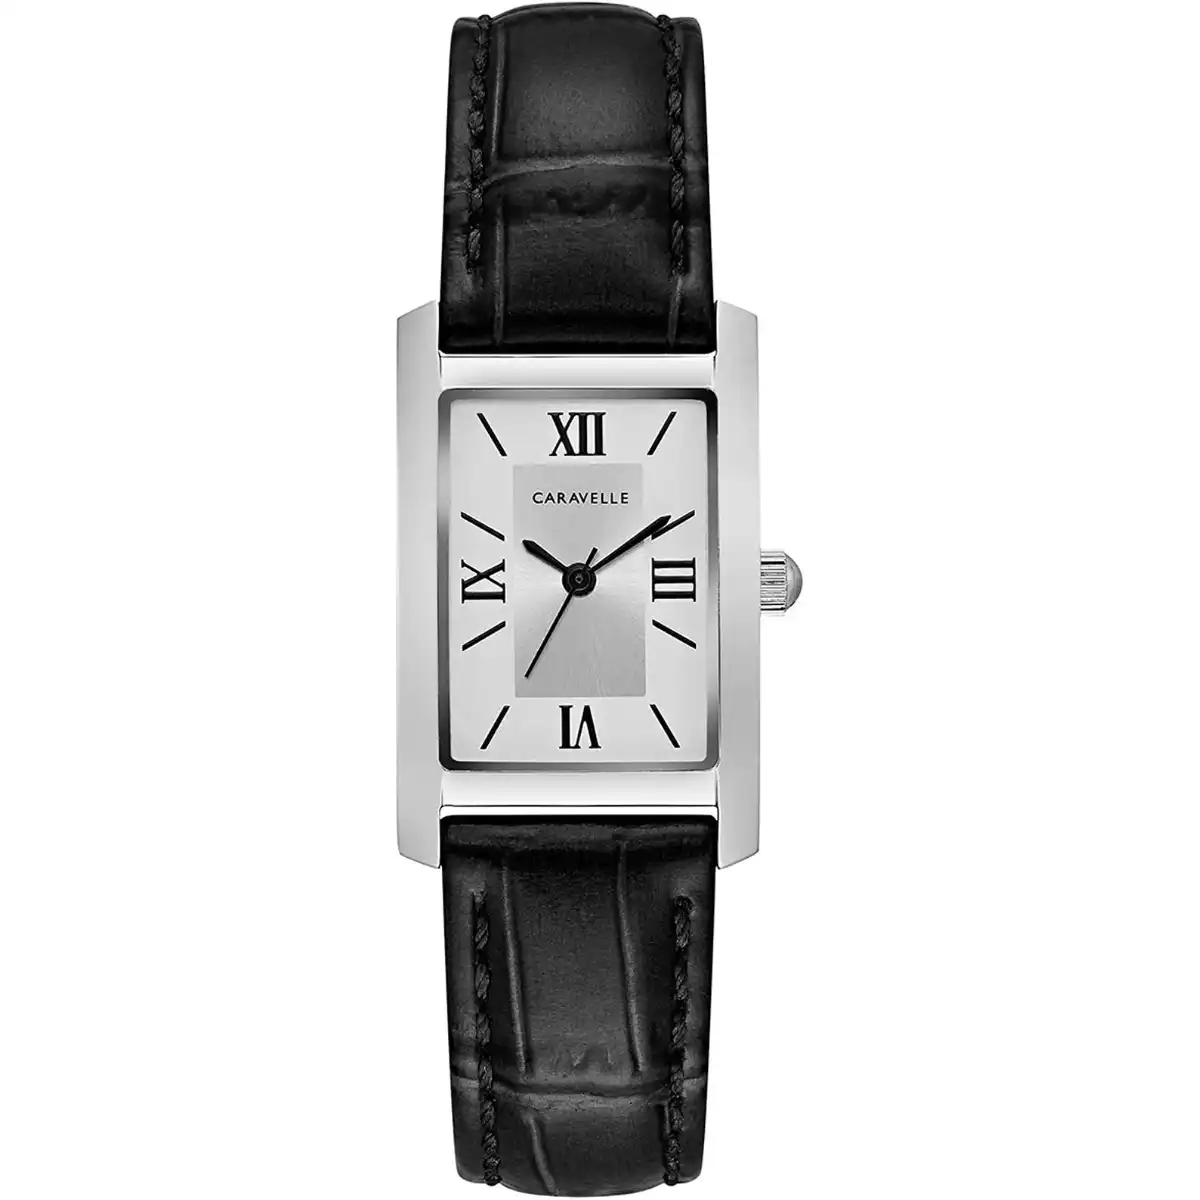 Cartier tank watch dupe amazon 2